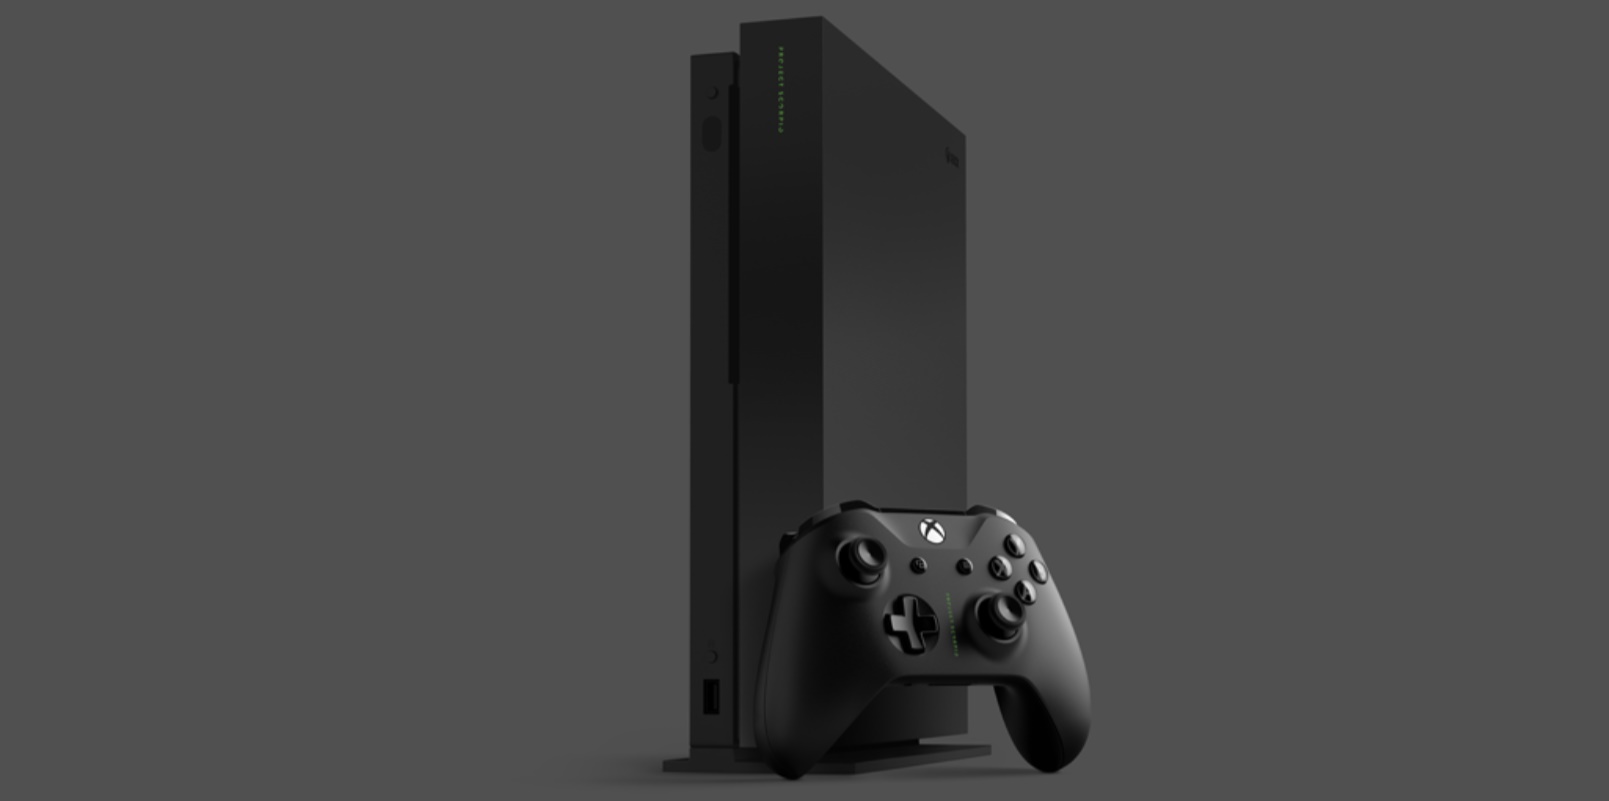 Microsoft Opens Xbox One X Pre Orders With Limited Project Scorpio Edition